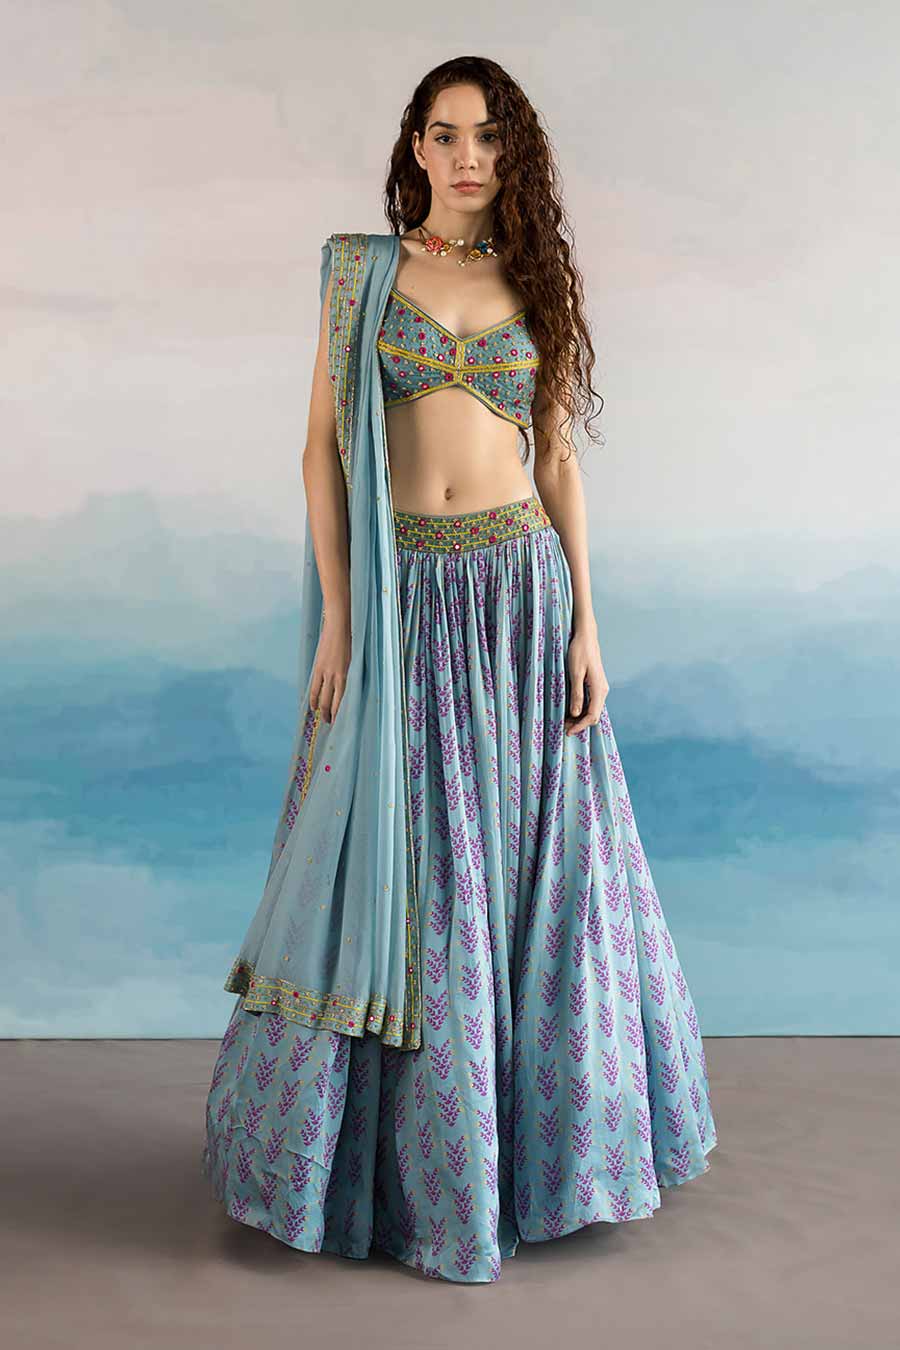 Best traditional and contemporary Indian lehengas for weddings in 2022